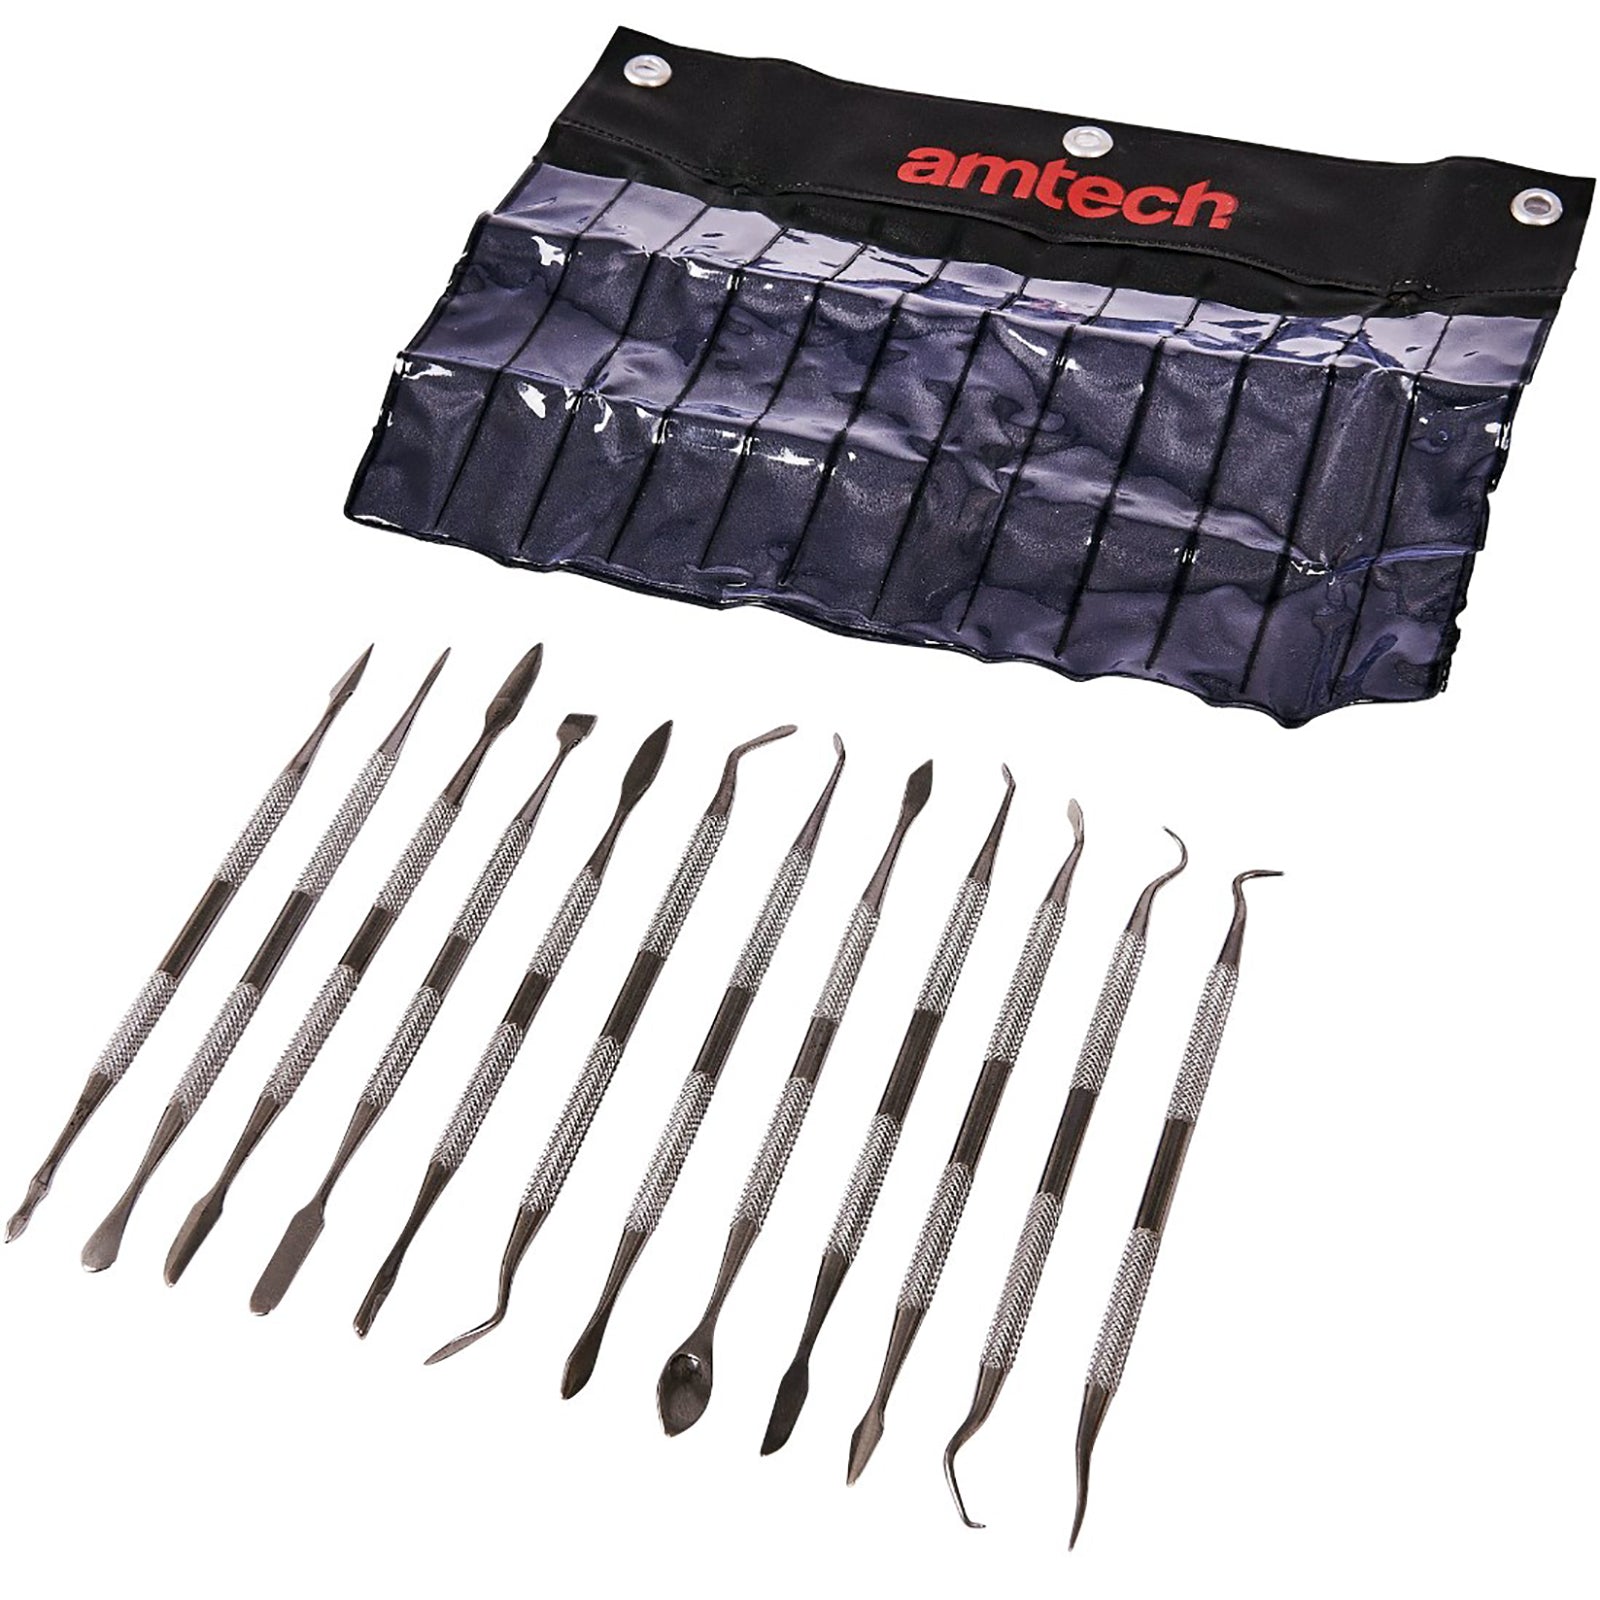 Amtech 12 Piece Stainless Steel Wax Carving Set